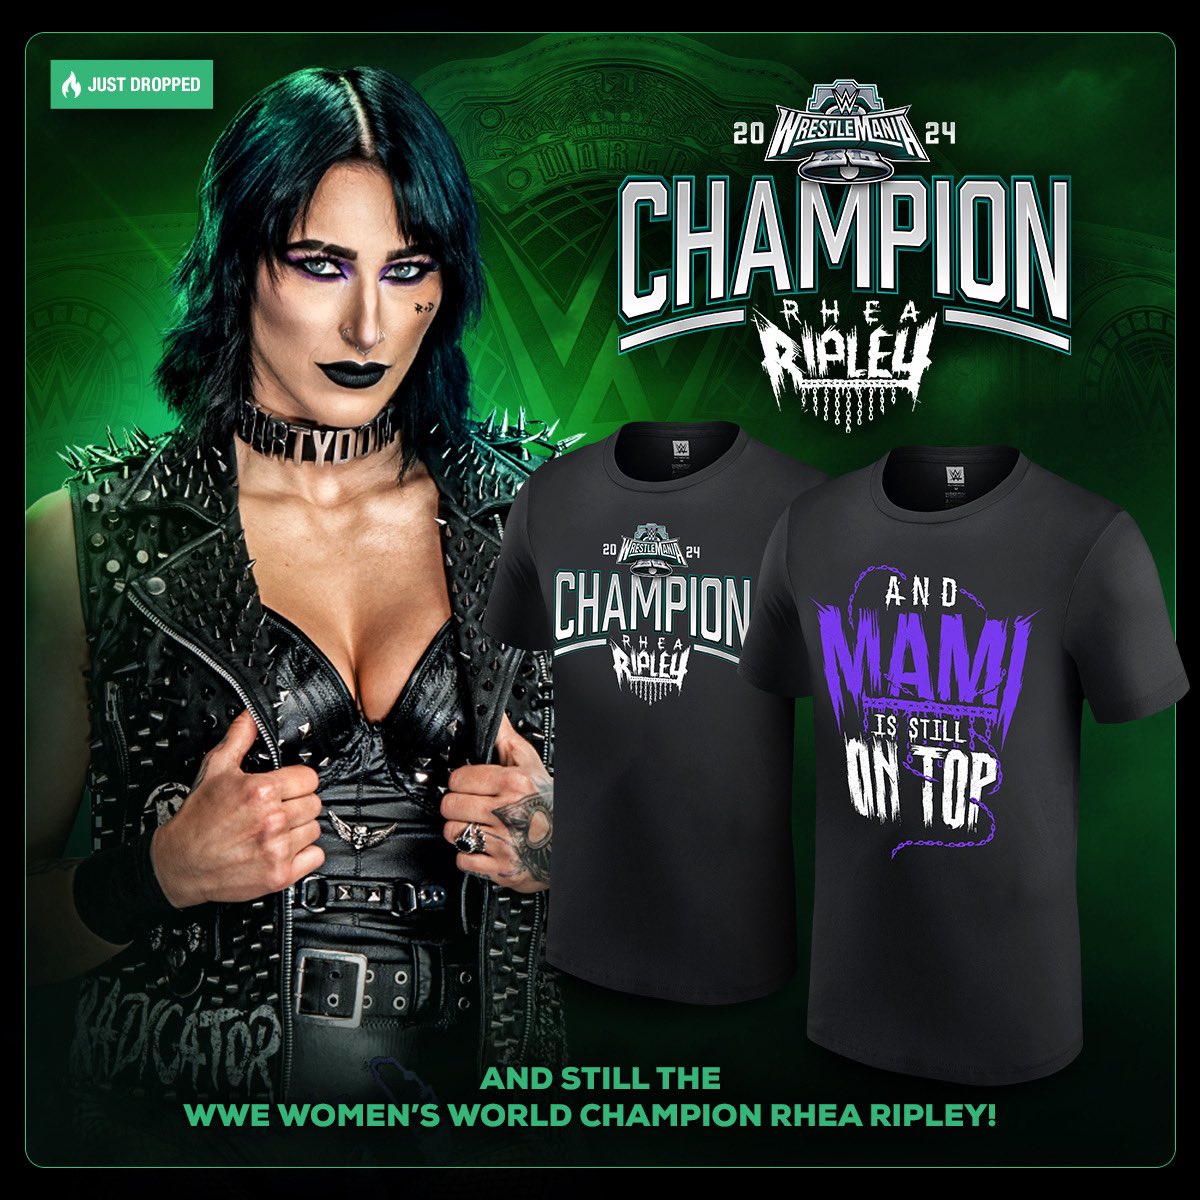 Mami is STILL on top! Celebrate Rhea Ripley’s WrestleMania victory with this NEW Champion collection at #WWEShop! #WWE #WrestleMania 🛒: bit.ly/3VPHJcq